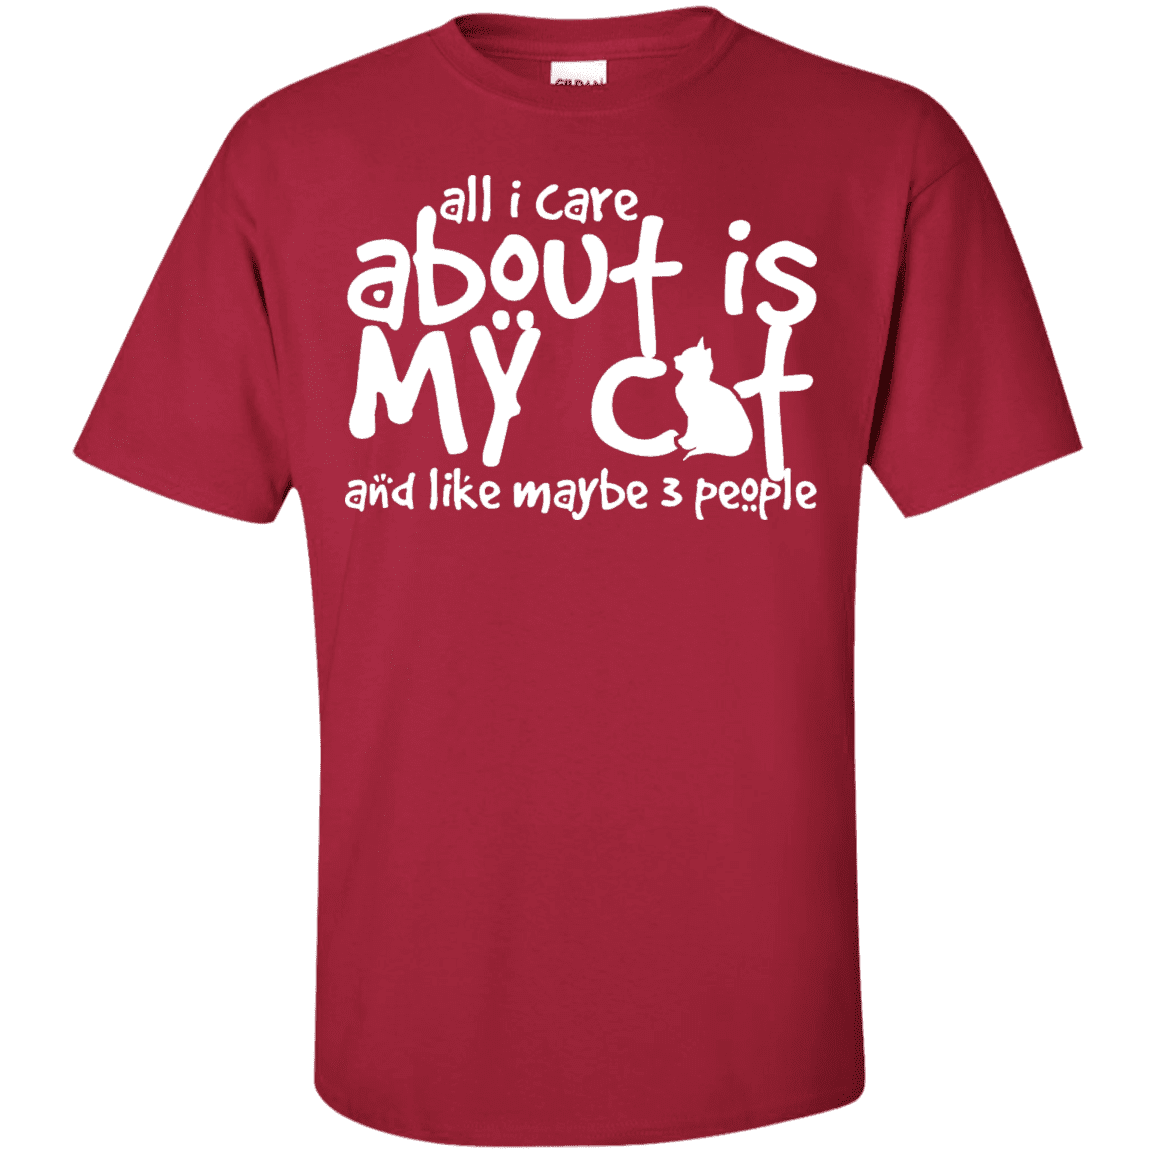 All I Care About Is My Cat - T Shirt.